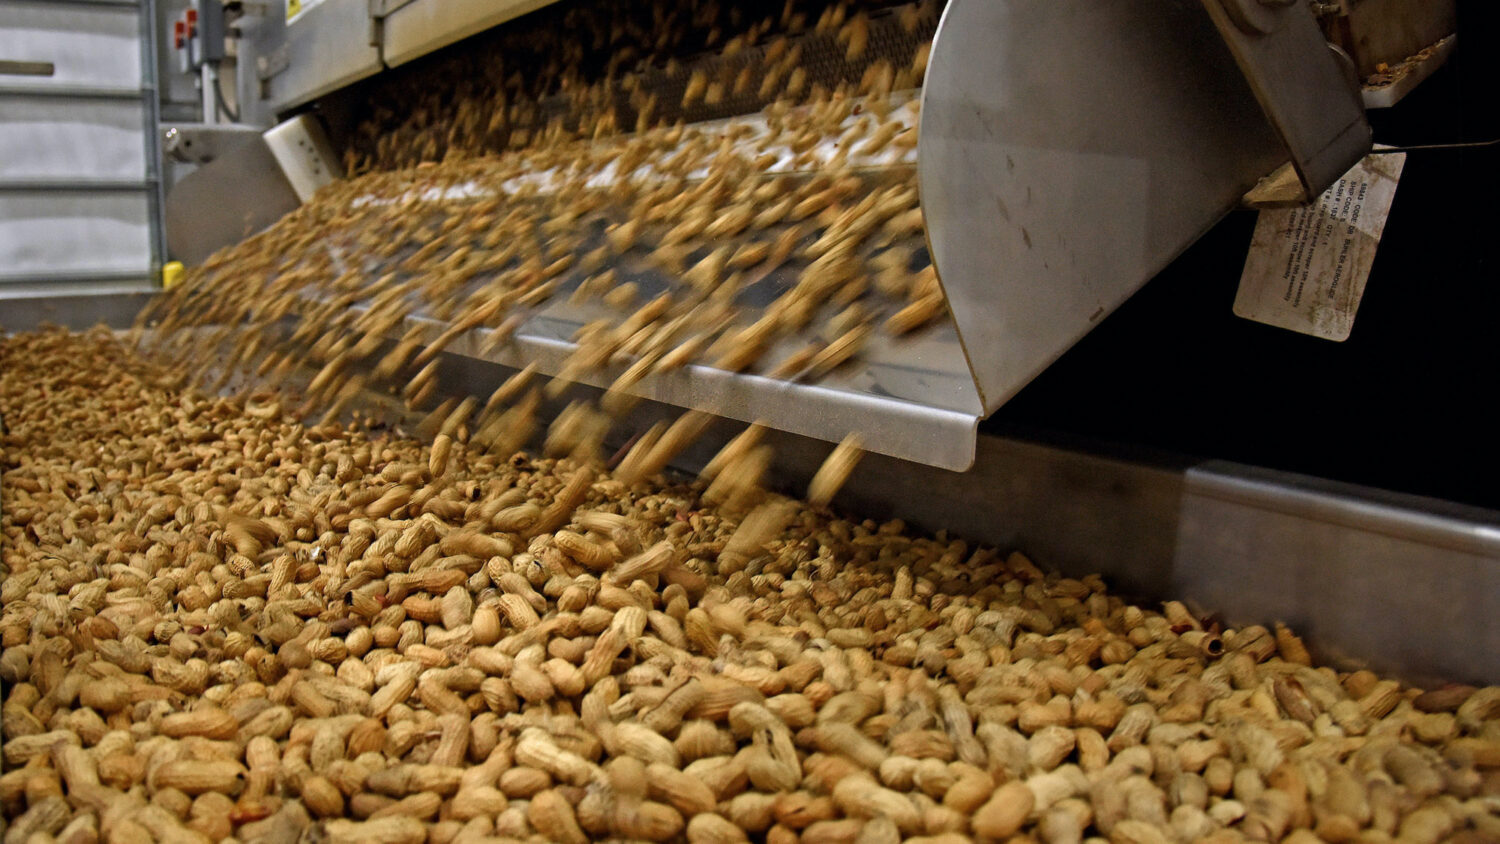 Peanuts in a packing facility